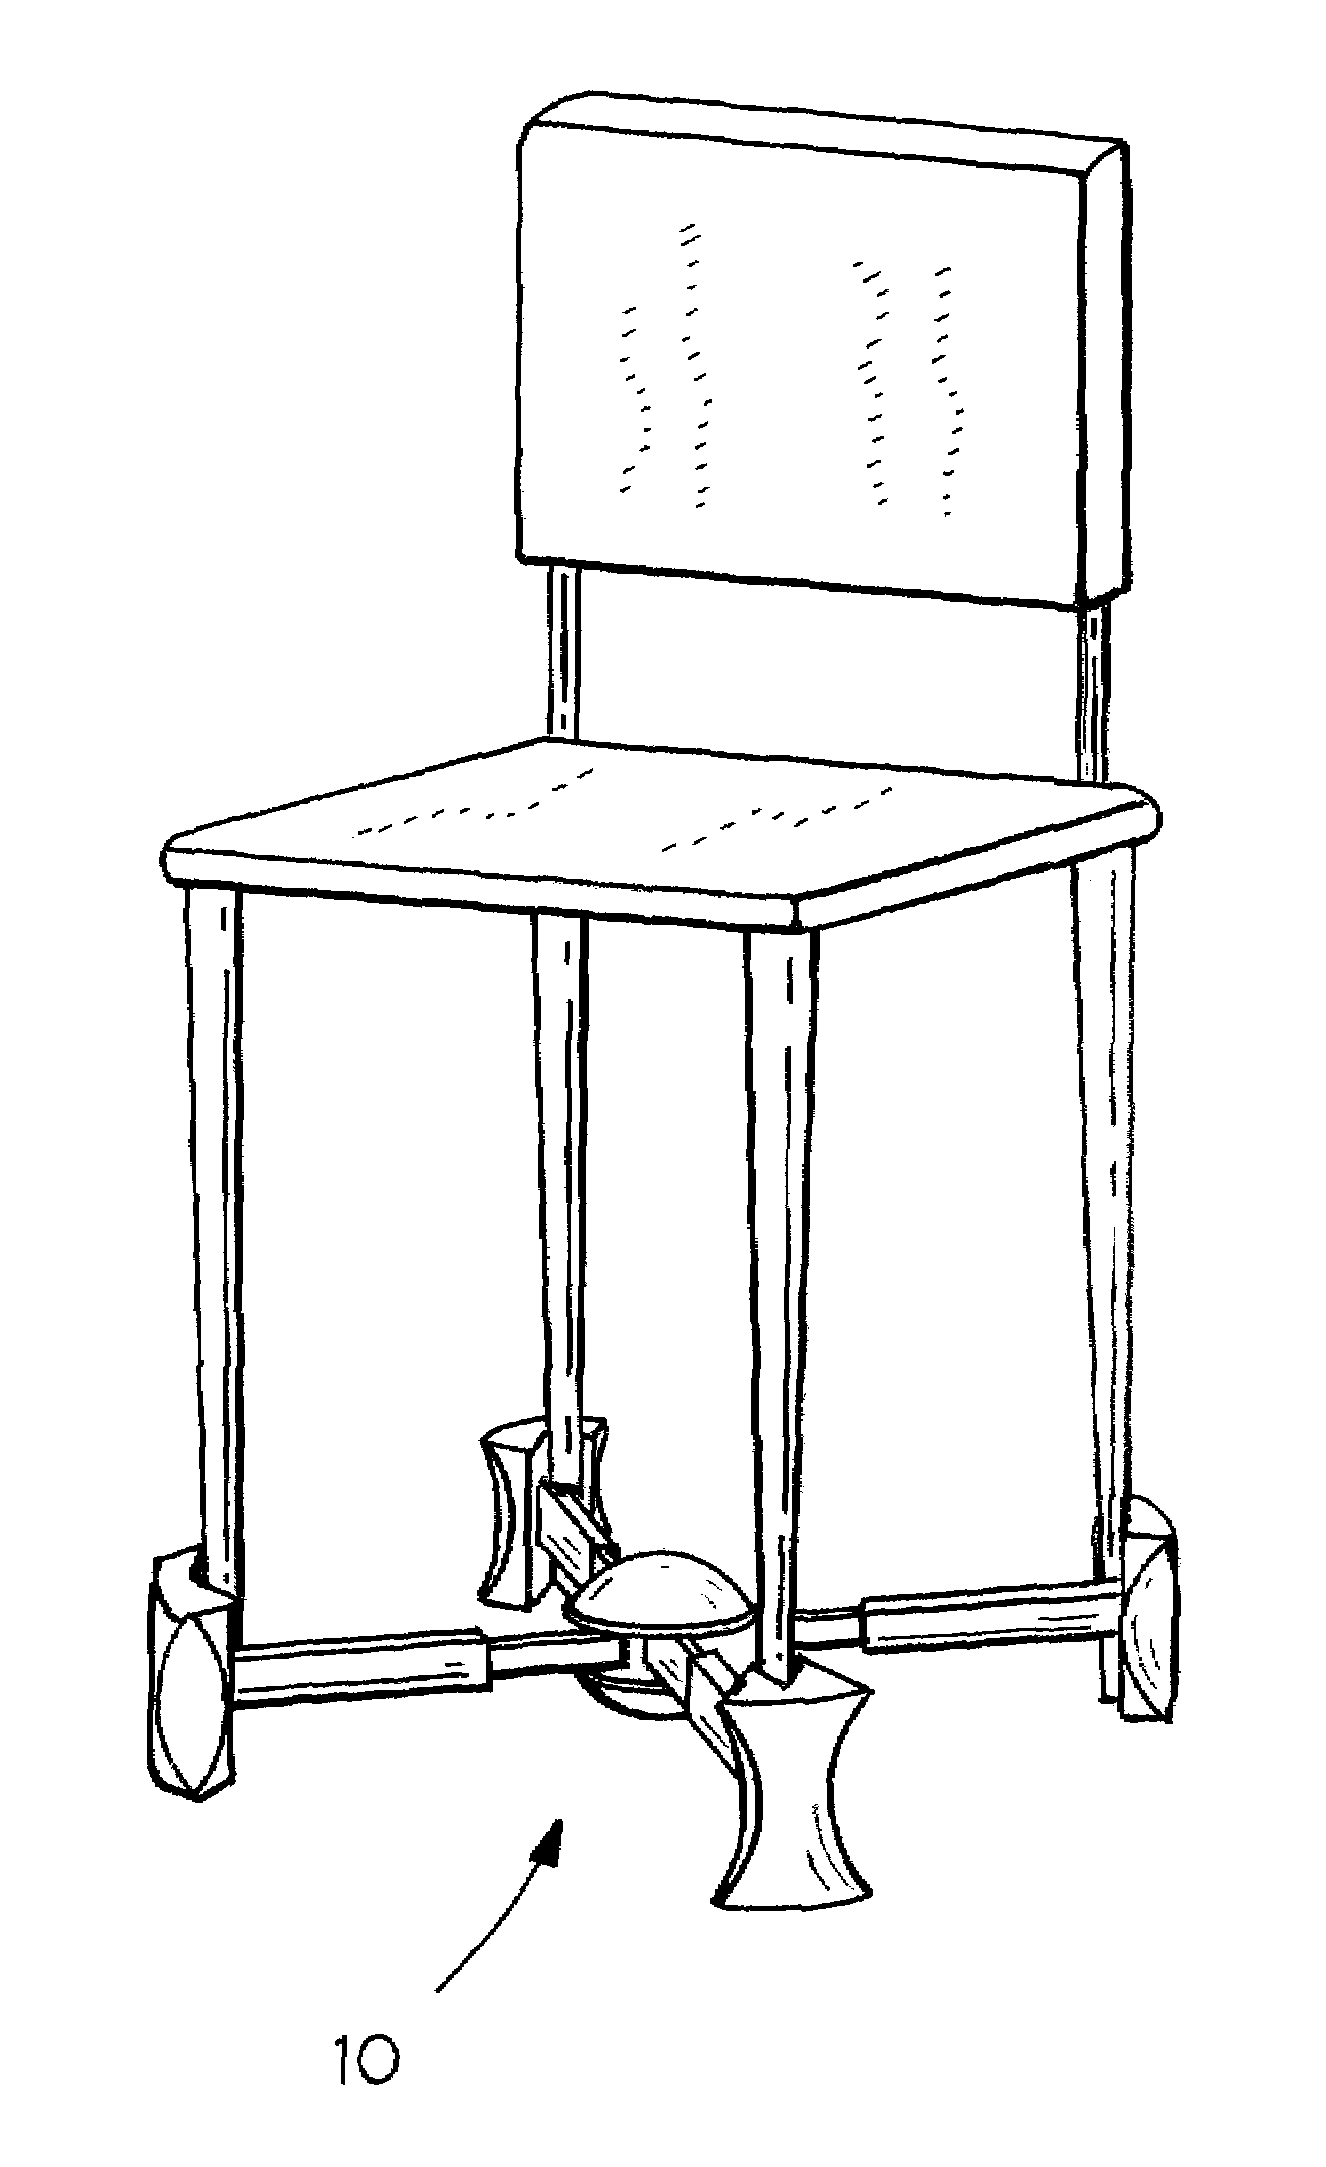 Portable device and method for raising the height of furniture